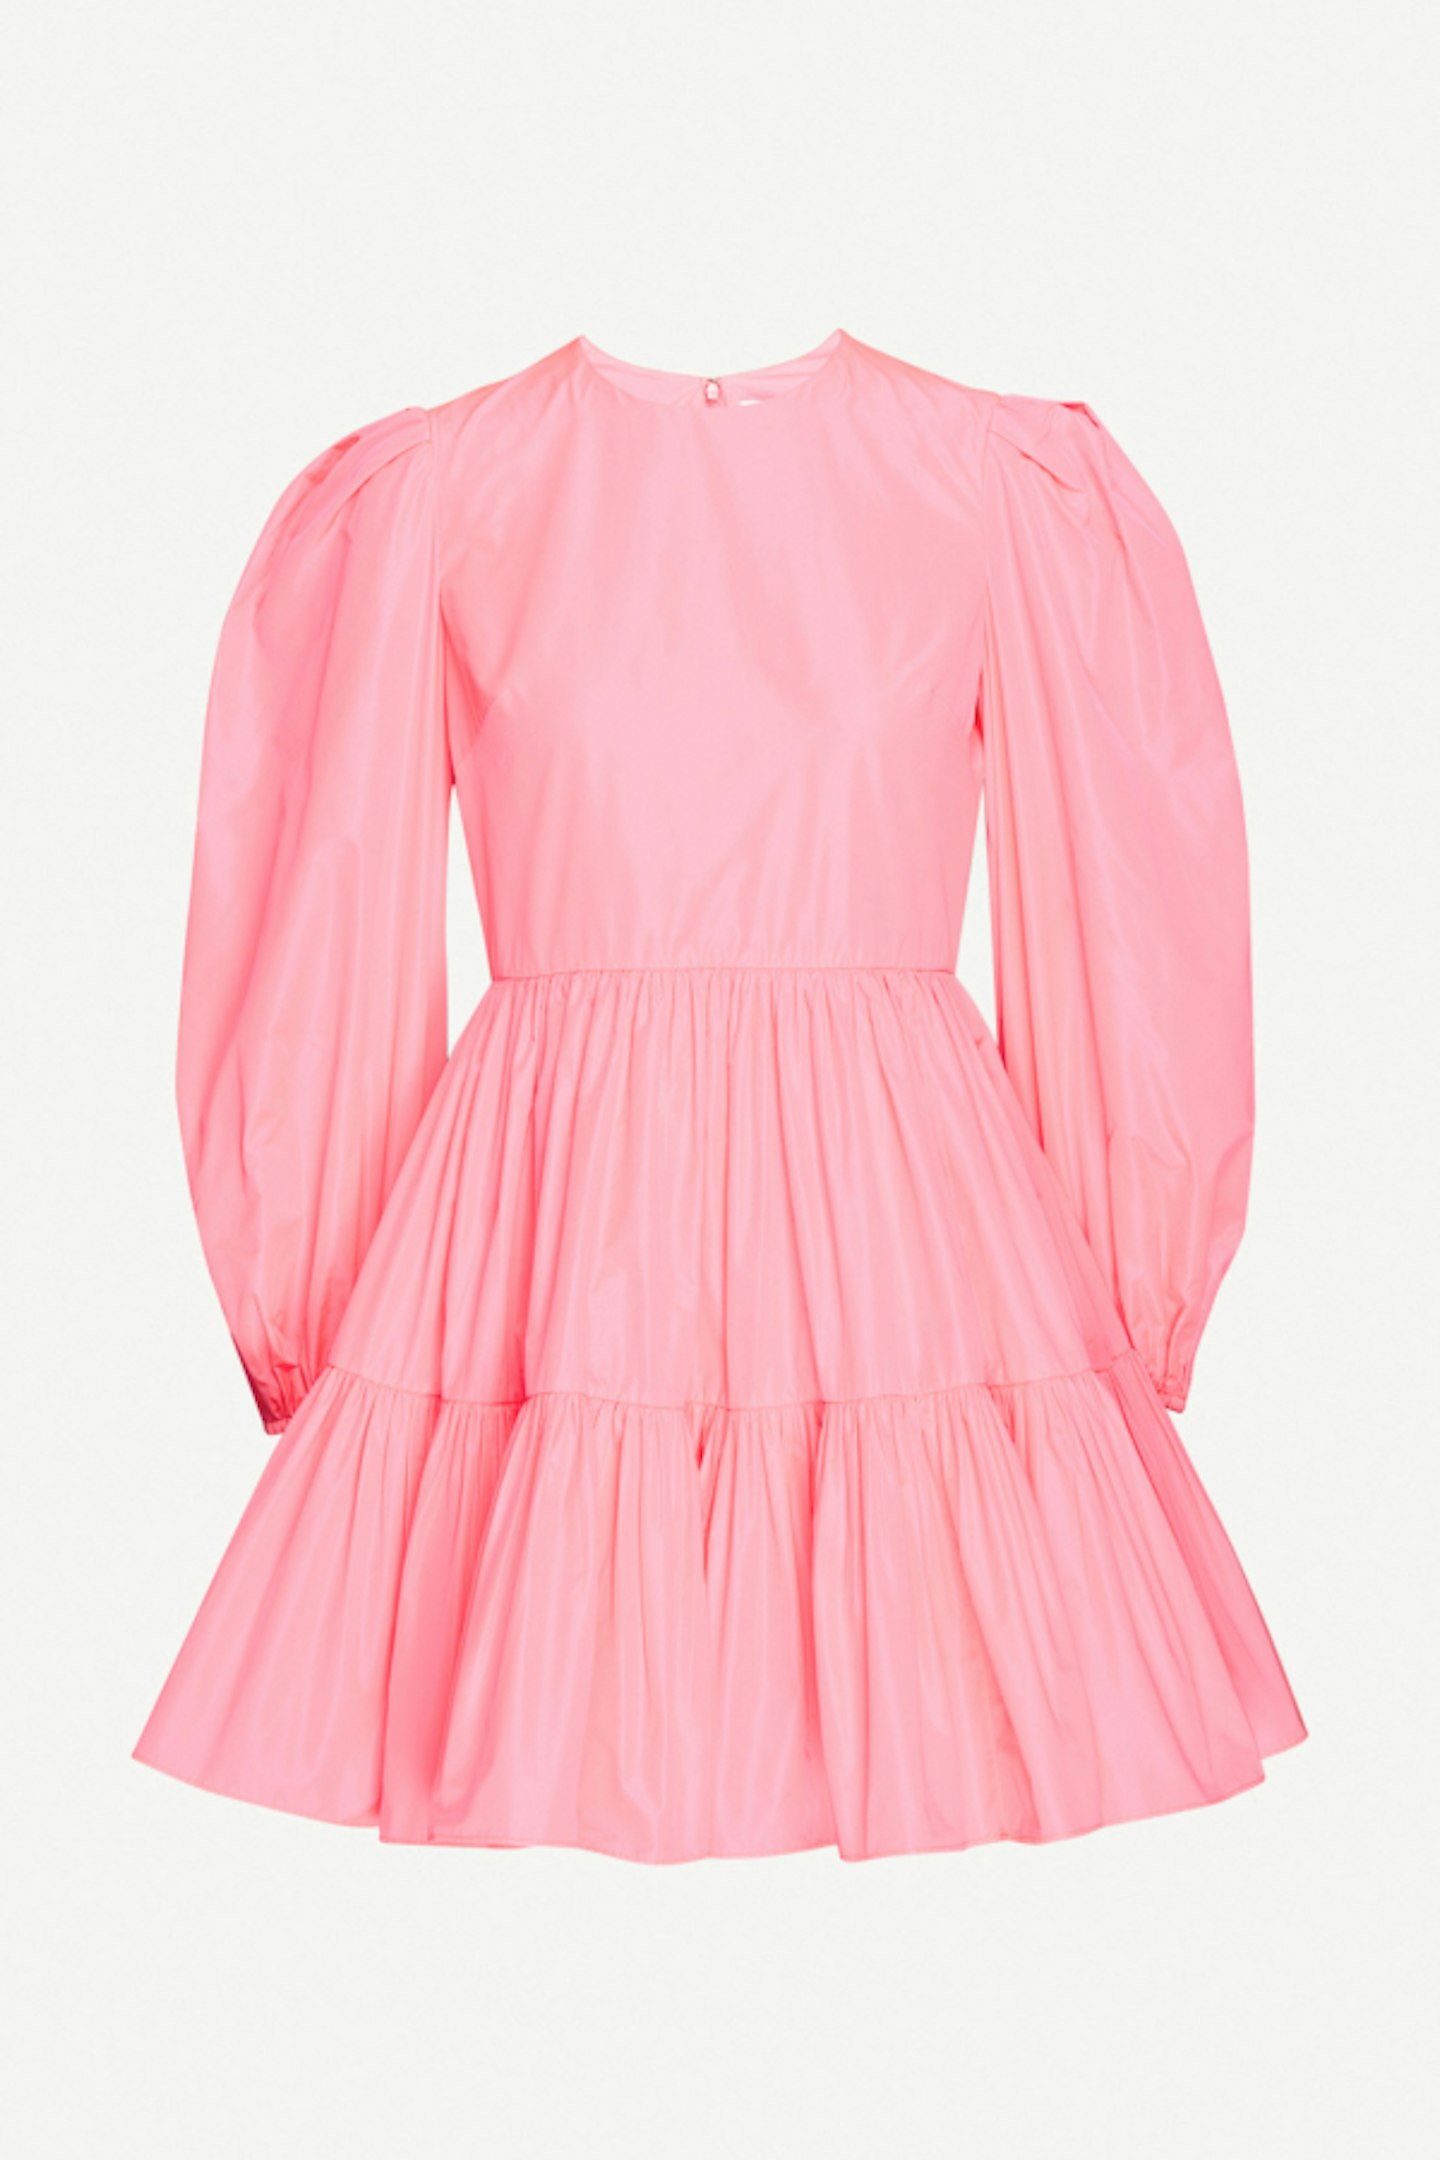 Valentino, Tiered Pleat Dress, Rent From £99